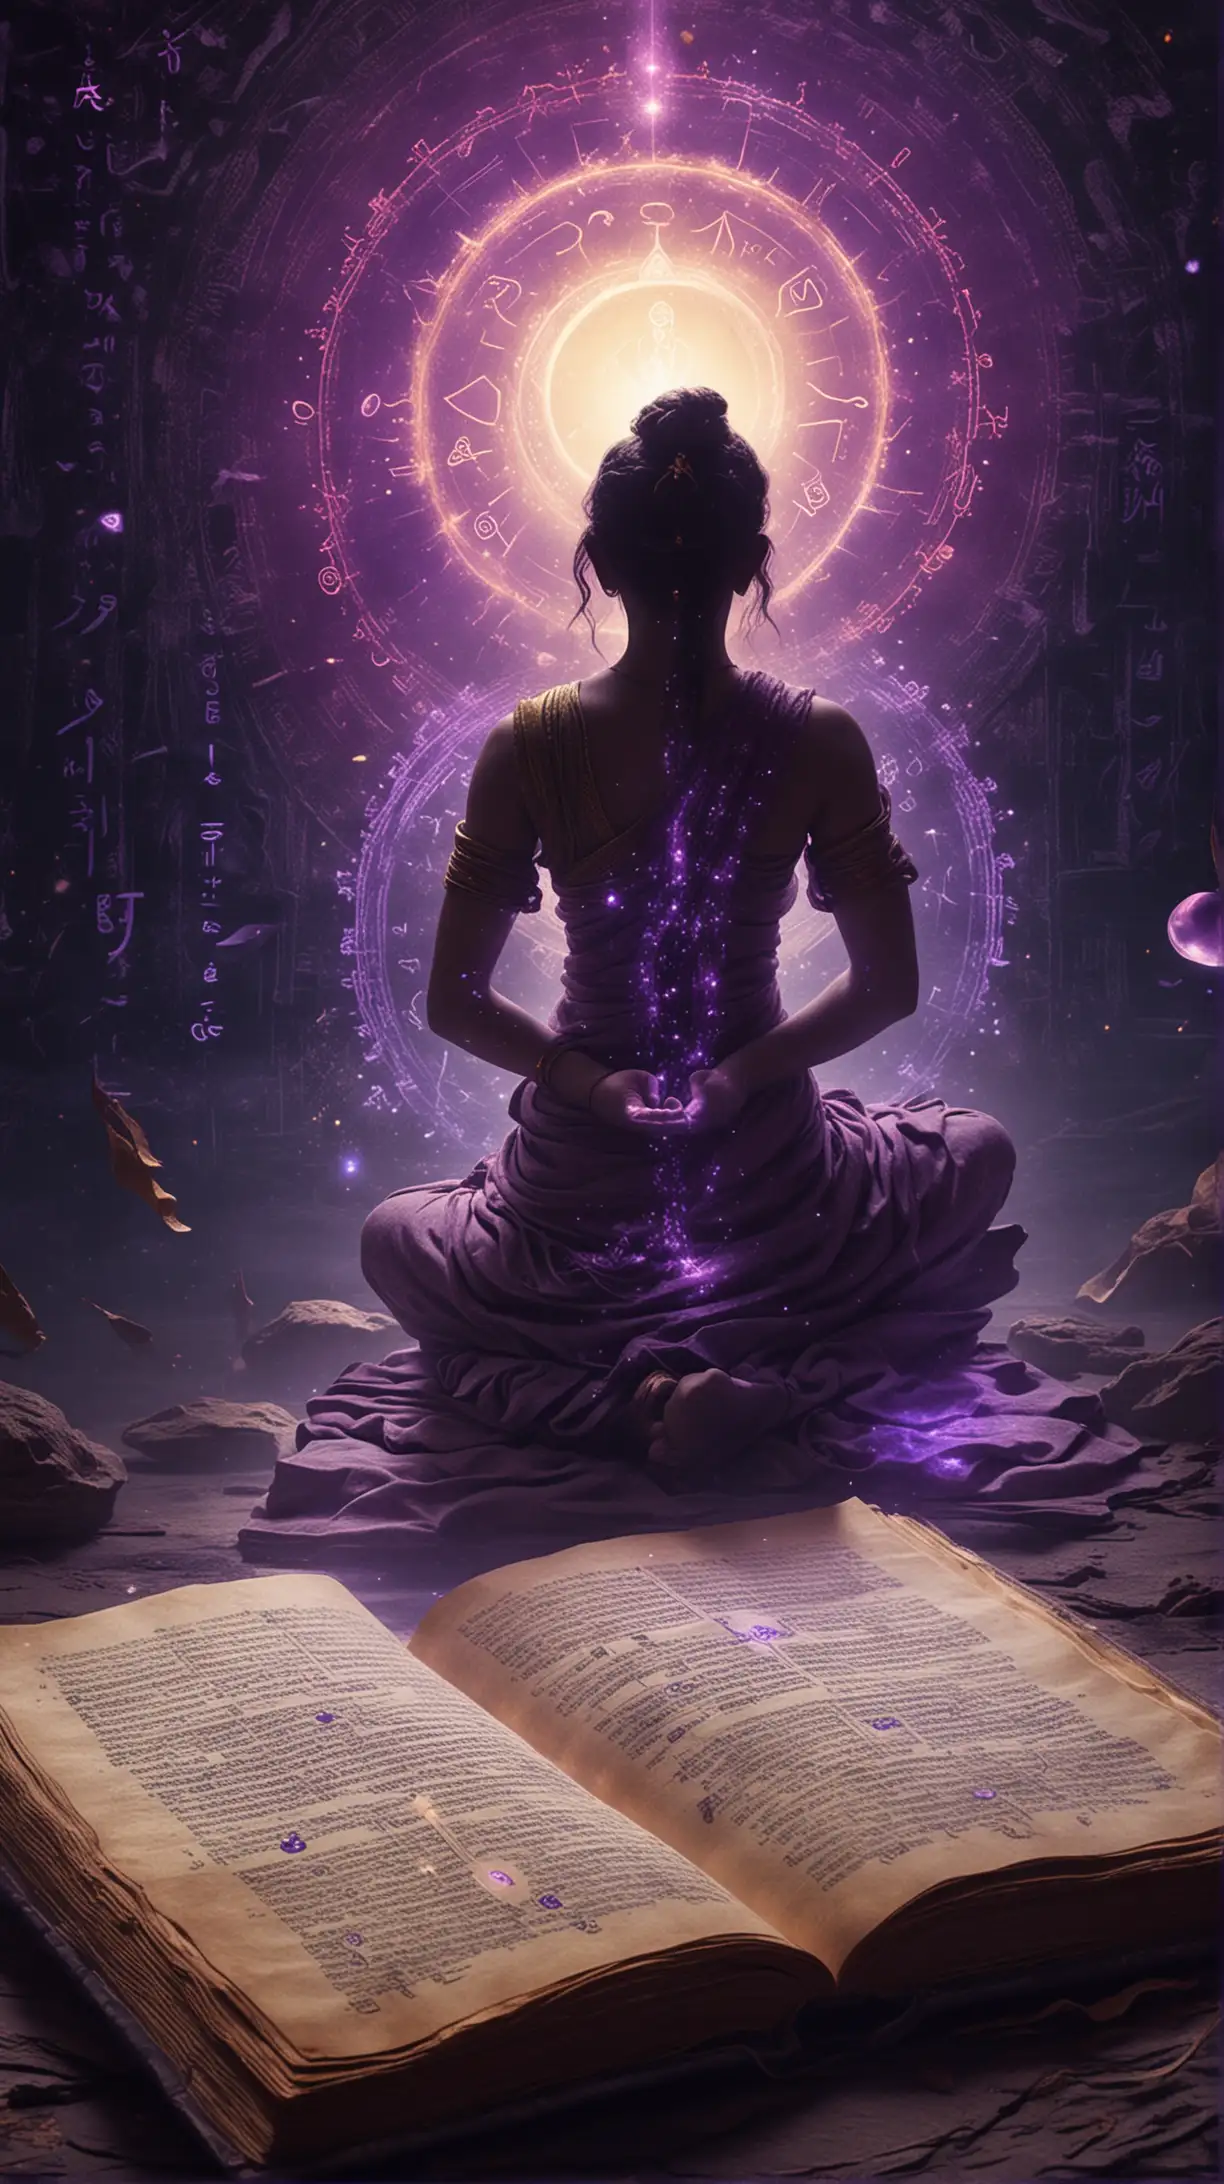 Foreground:

An open ancient book with glowing symbols or Sanskrit text, hinting at the knowledge contained within.
Background:

A faint silhouette of a meditating person, symbolizing the potential for accessing the Akashic Records.
Style:

Blend of realism and digital art, with a touch of mystery and cosmic energy.
Colors: Deep blues, purples, and golds to evoke a sense of the unknown and the ethereal.